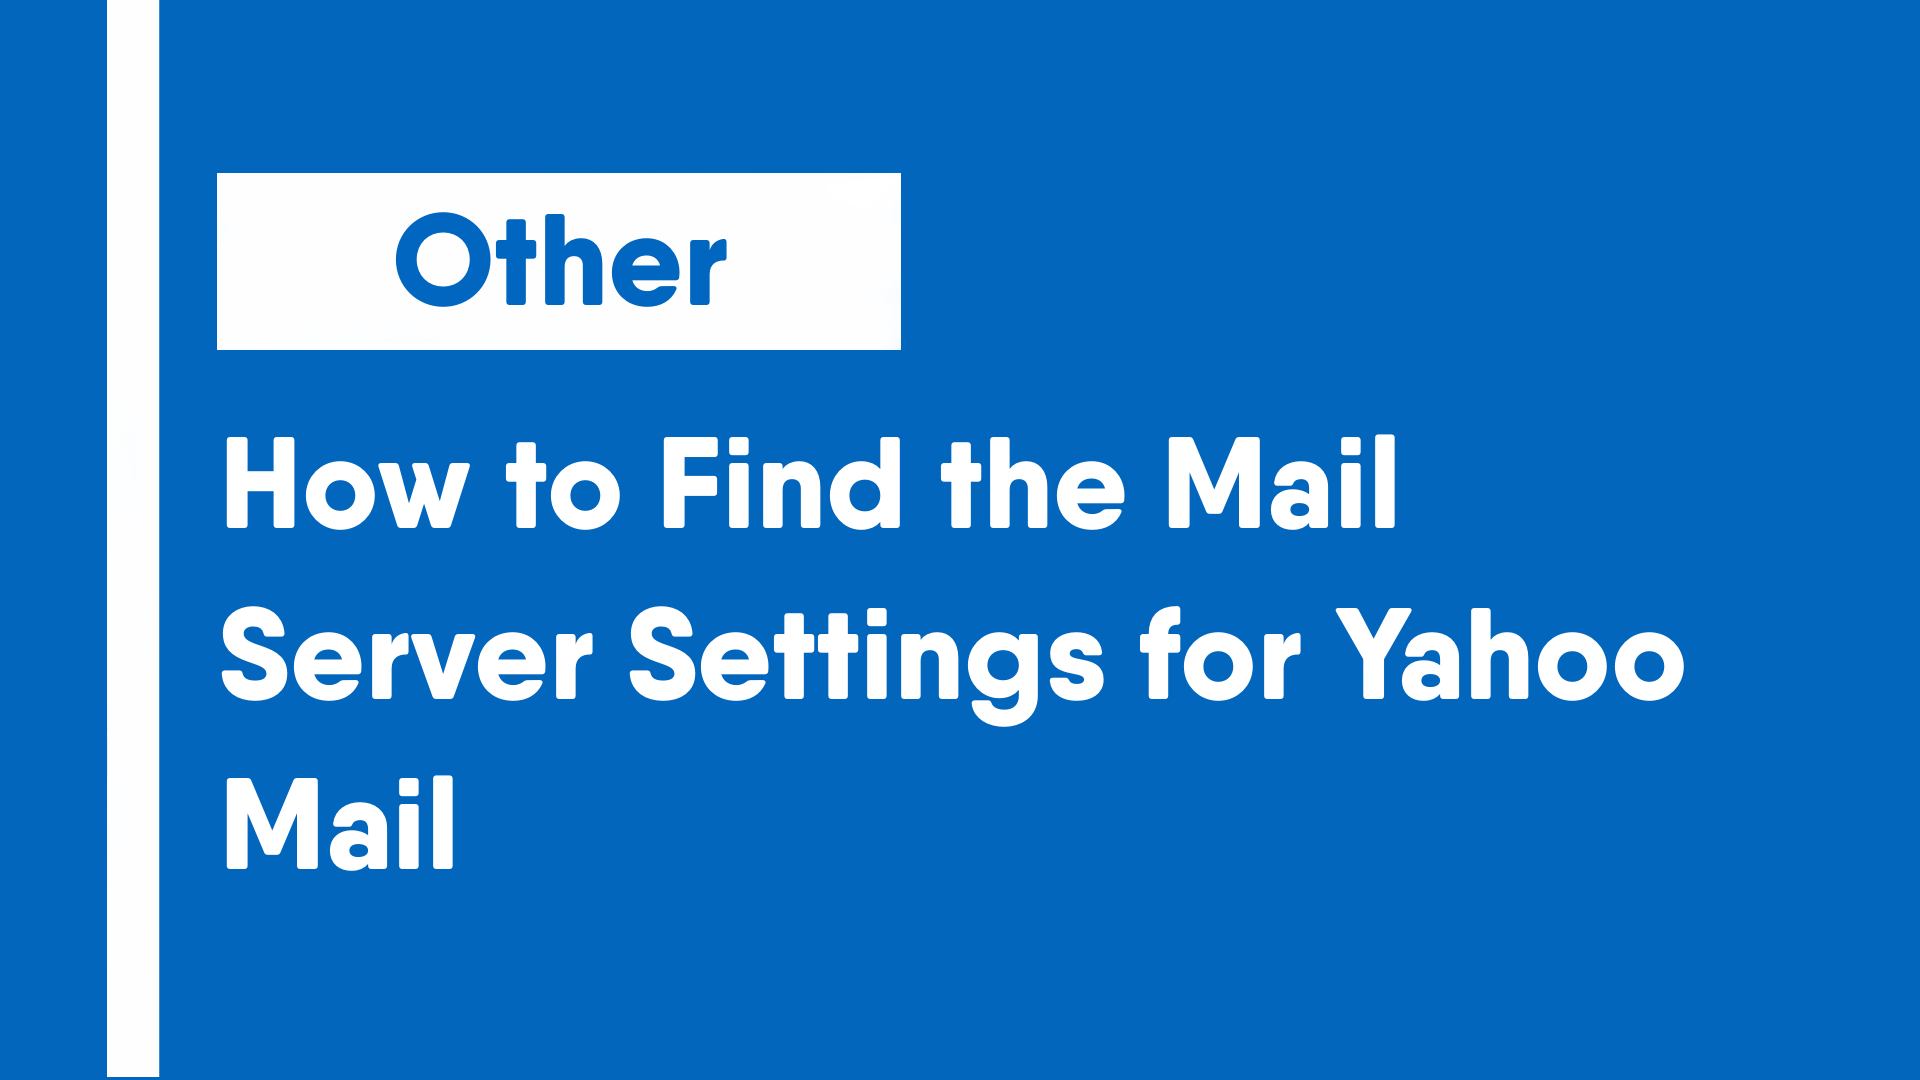 How to Find the Mail Server Settings for Yahoo Mail